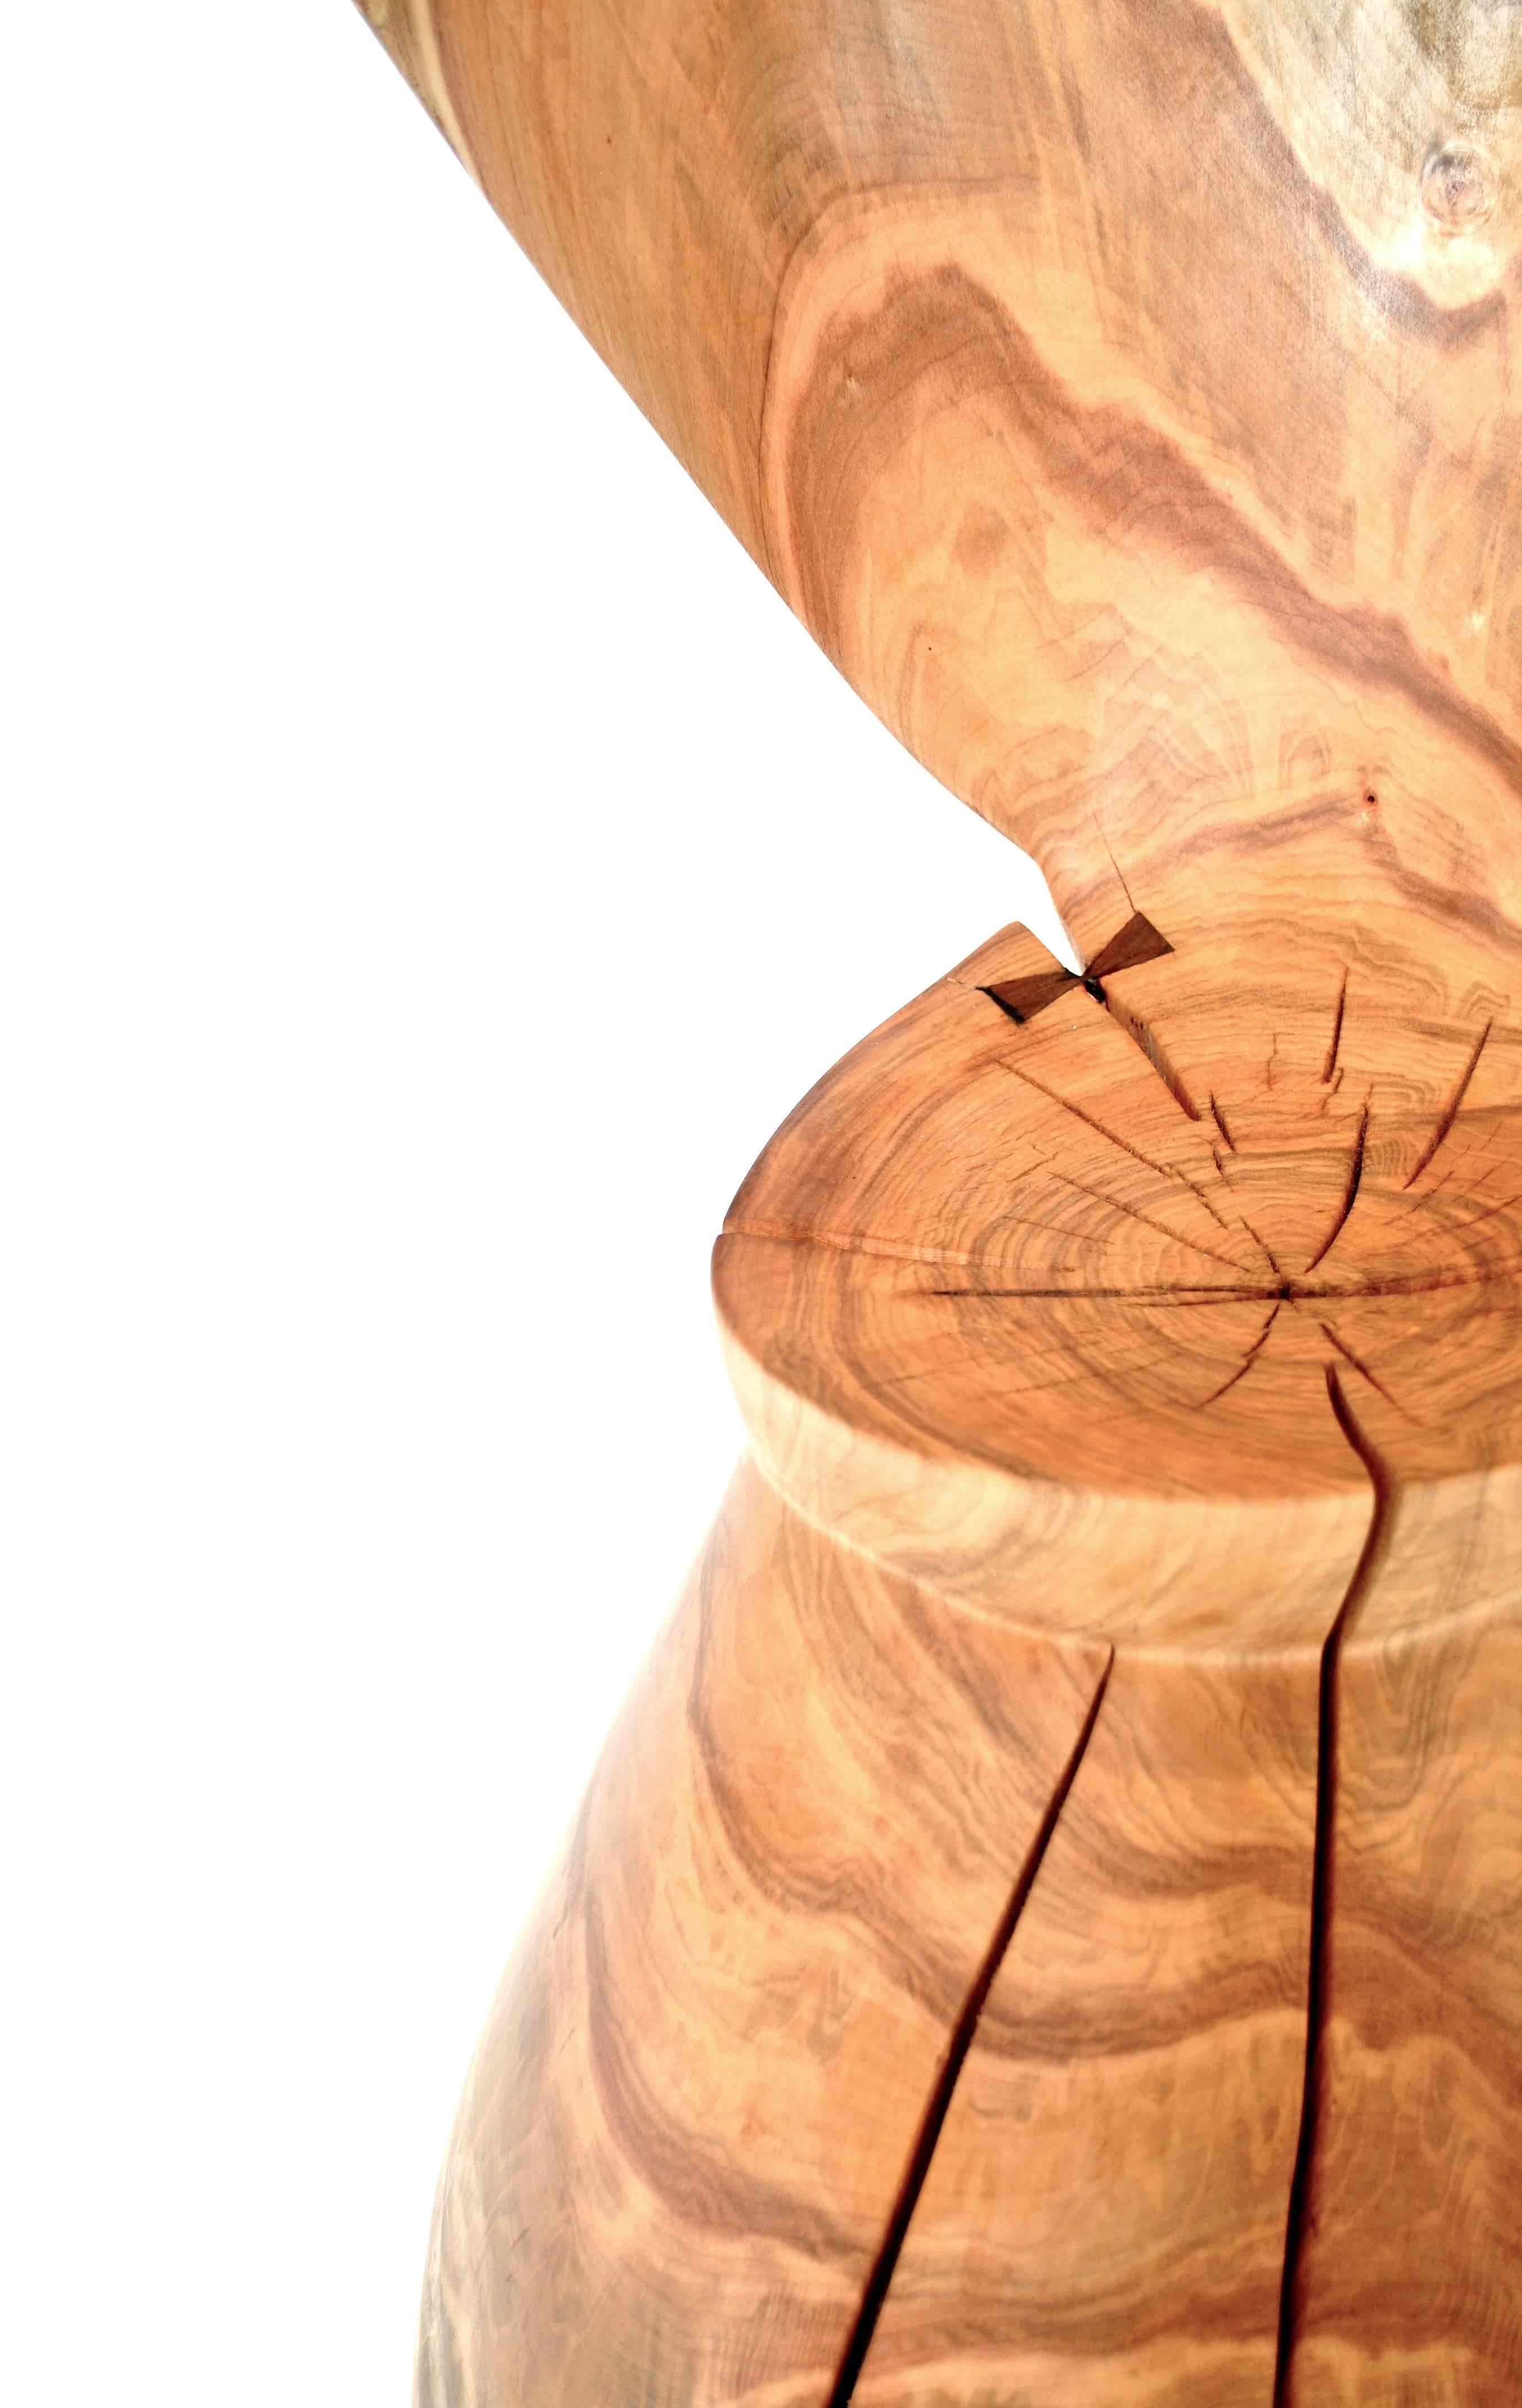 Unique signed chair by Jörg Pietschmann.
Chair, pointed maple
Measures: H 78 x D 50 x 50 cm
Polished oil finish.


In Pietschmann’s sculptures, trees that for centuries were part of a landscape and founded in primordial forces tell stories